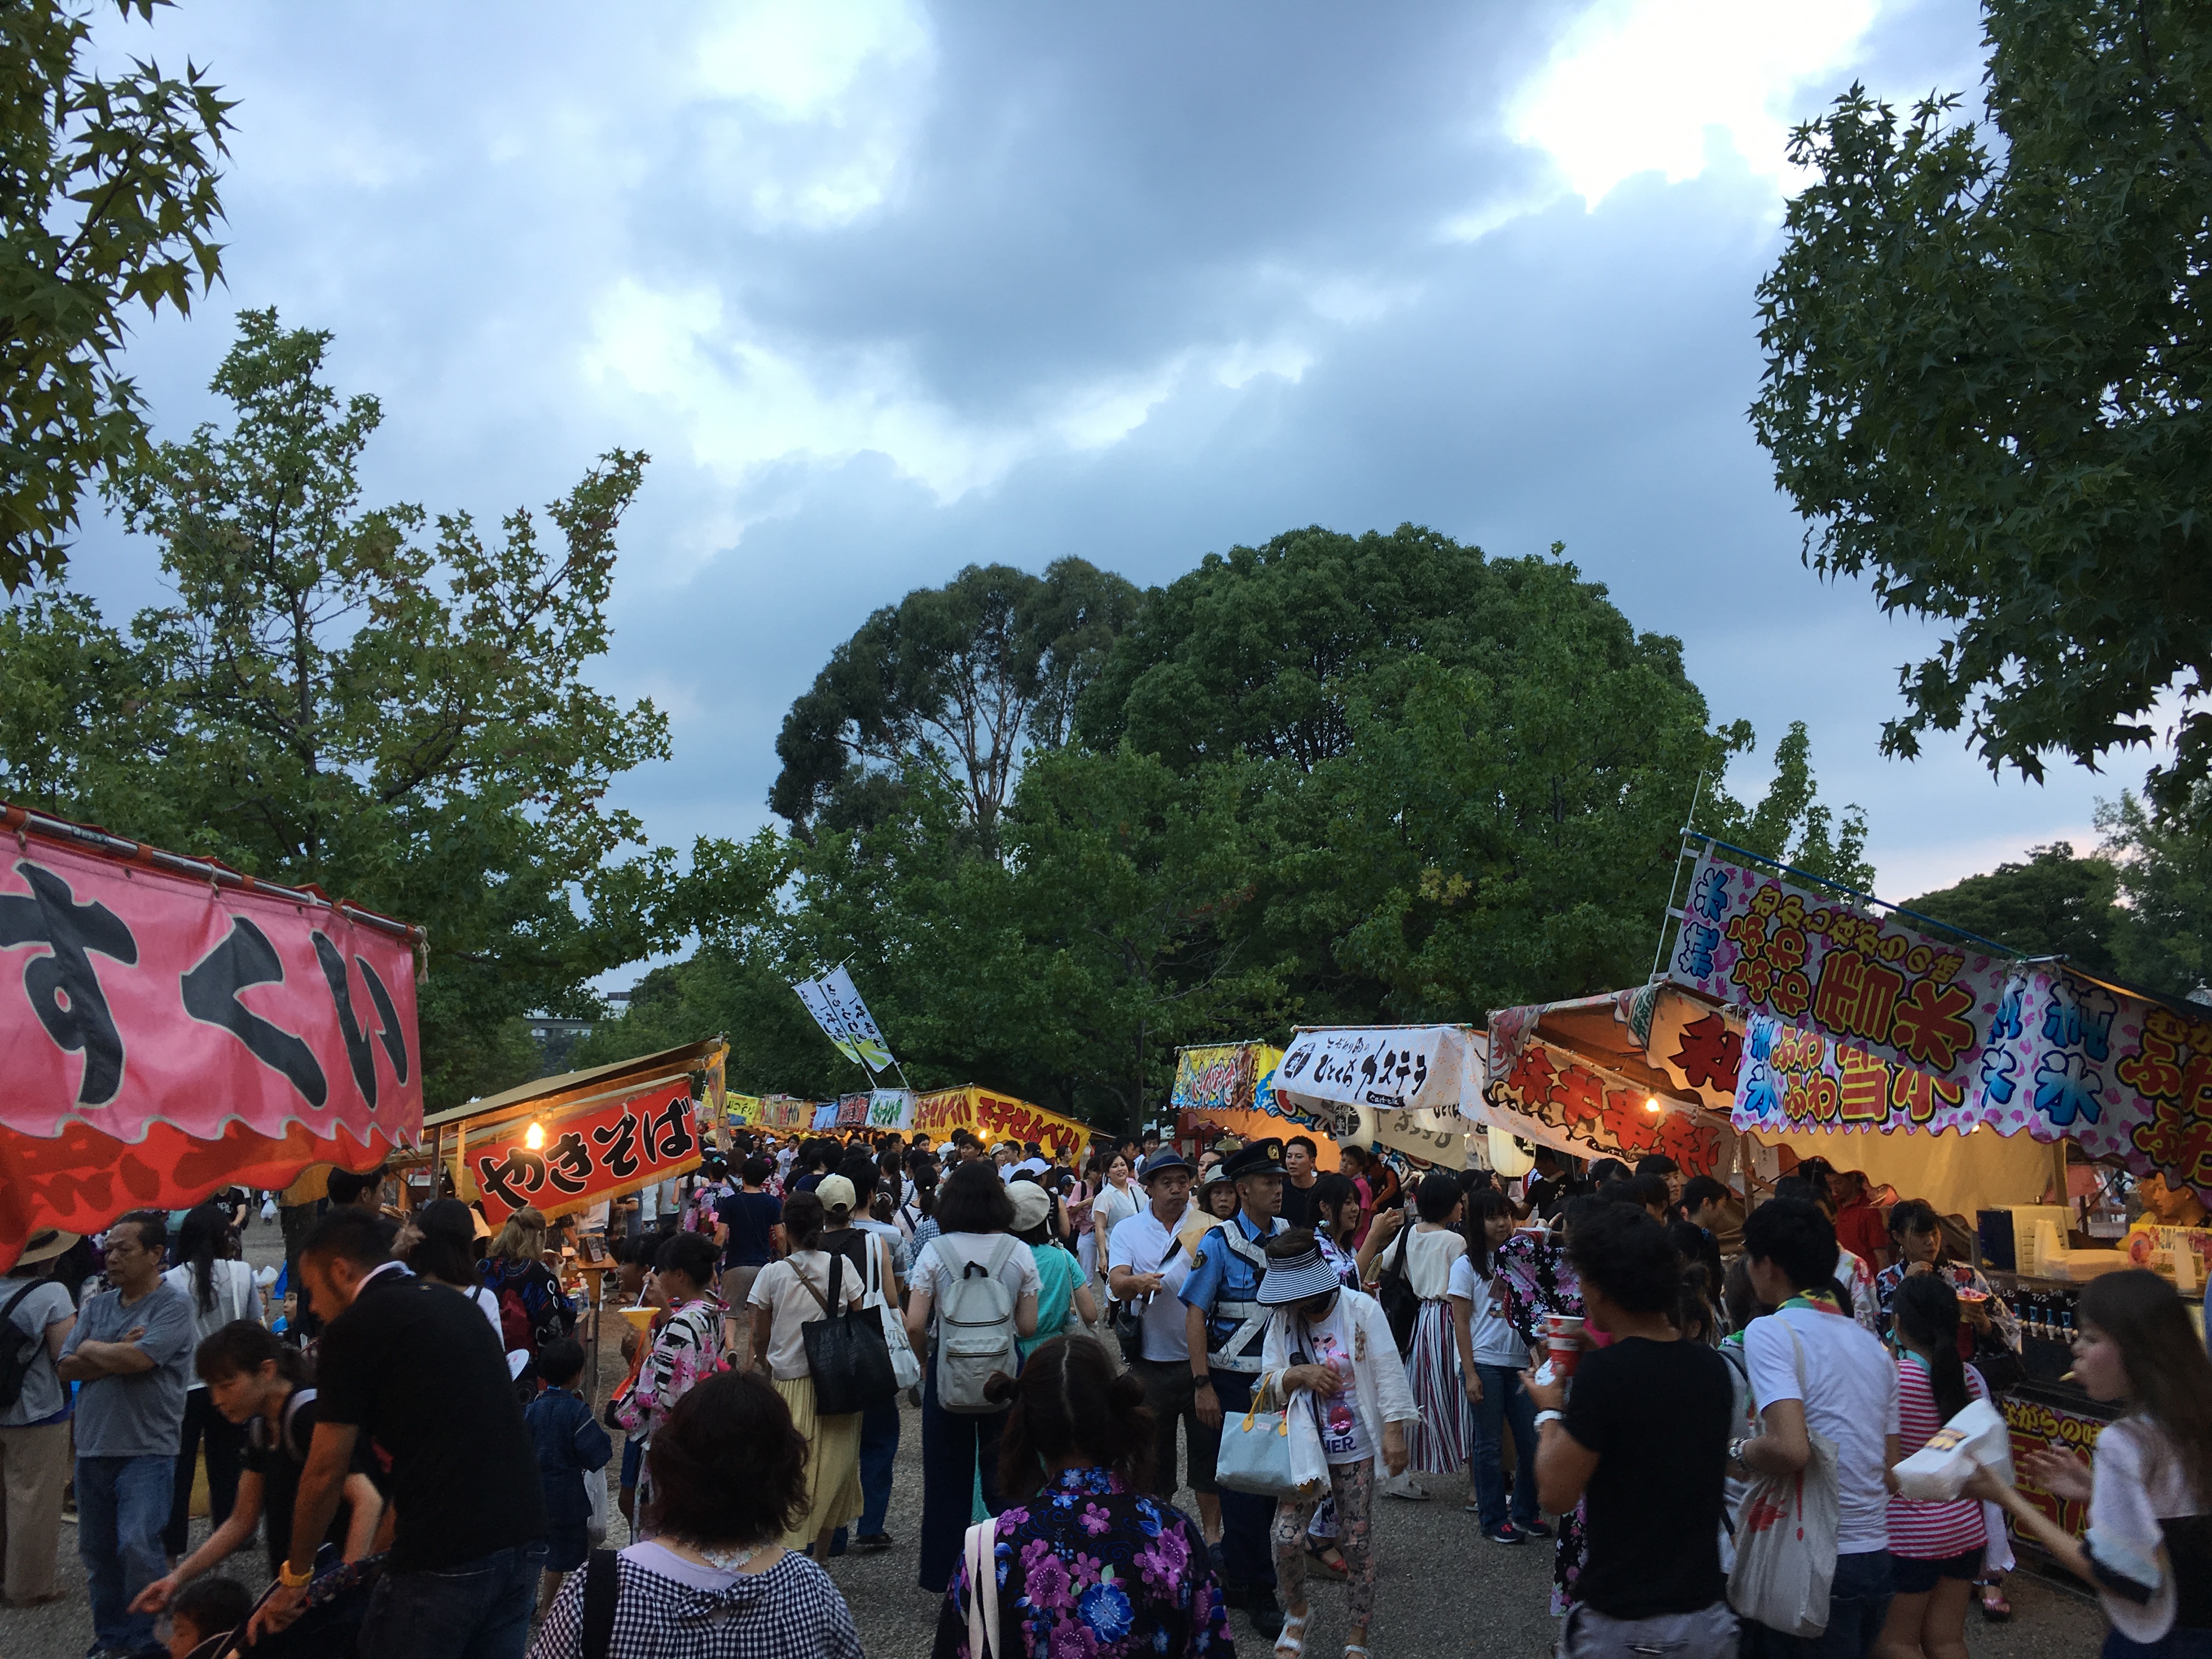 crowds at Japanese festivals and many colorful food stalls